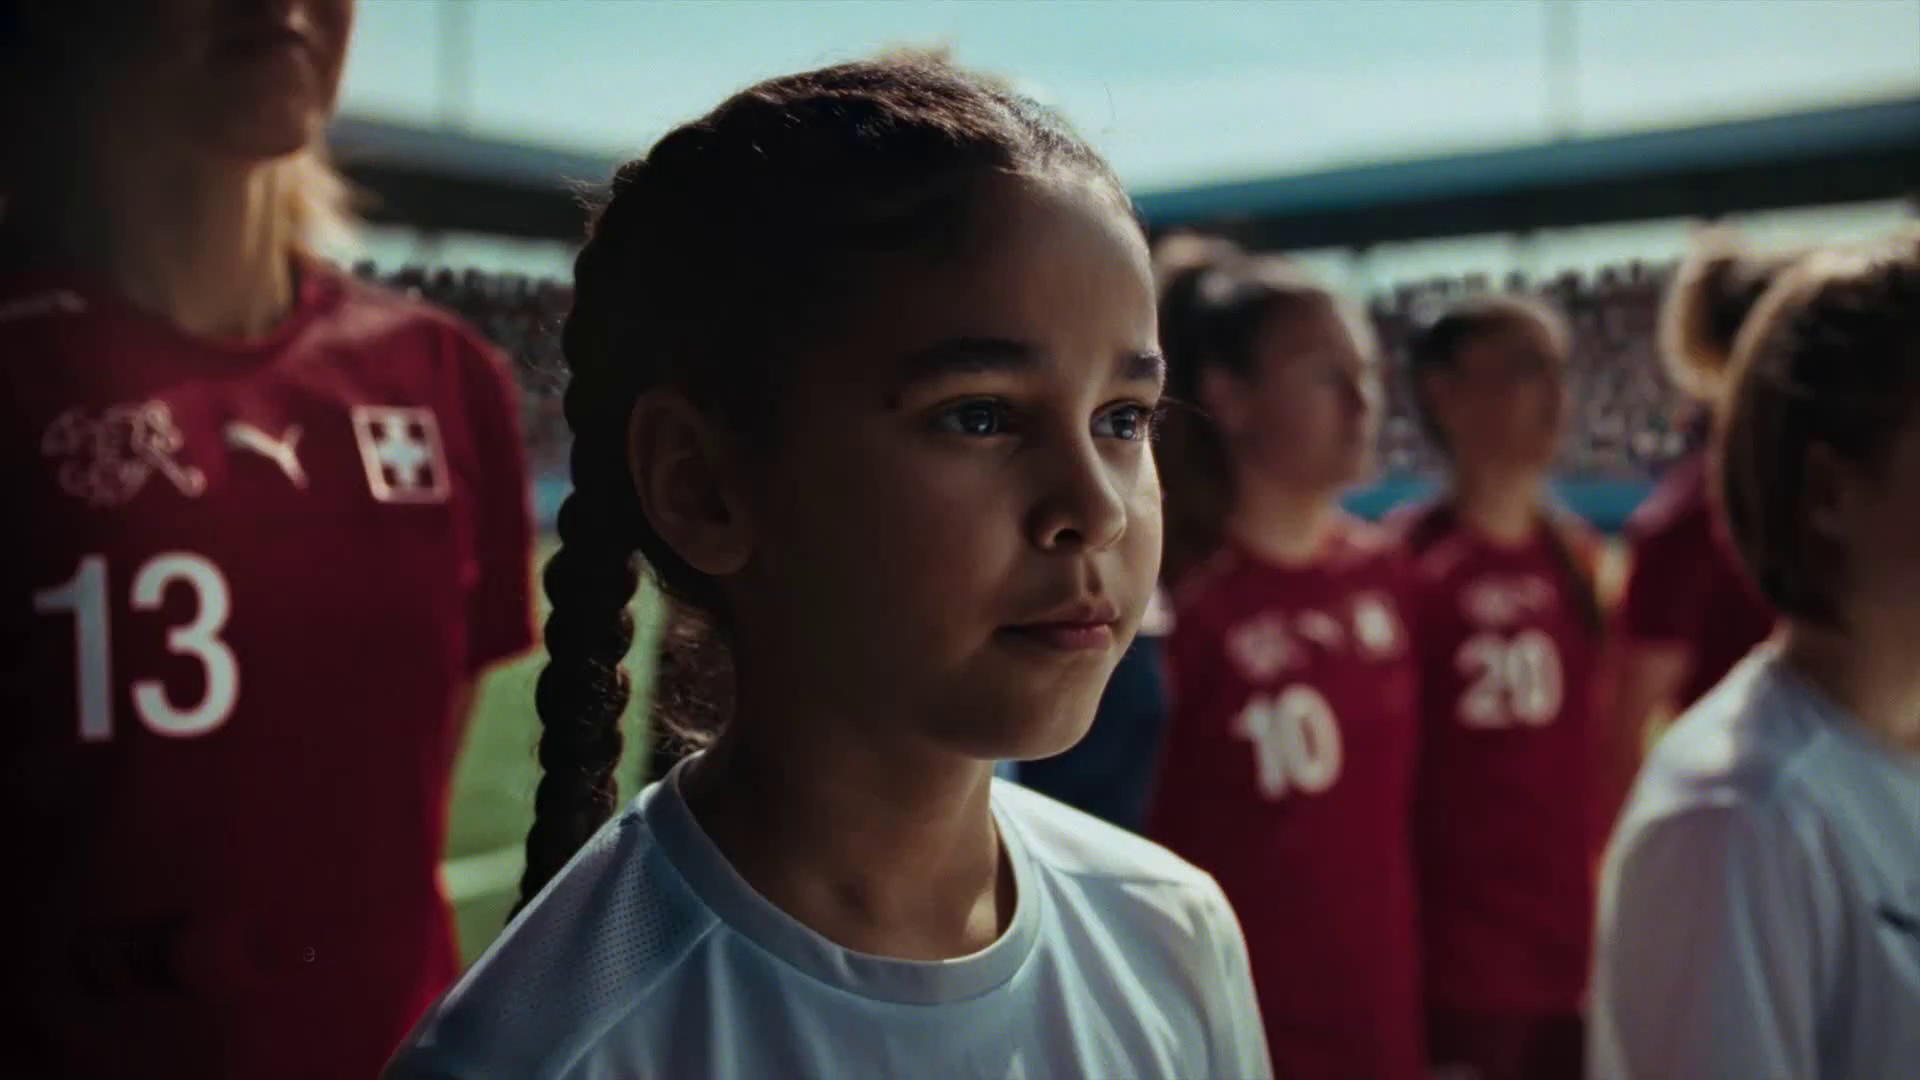 new credit Suisse ad with You'll never walk alone - by Tracks and Fields thumbnail